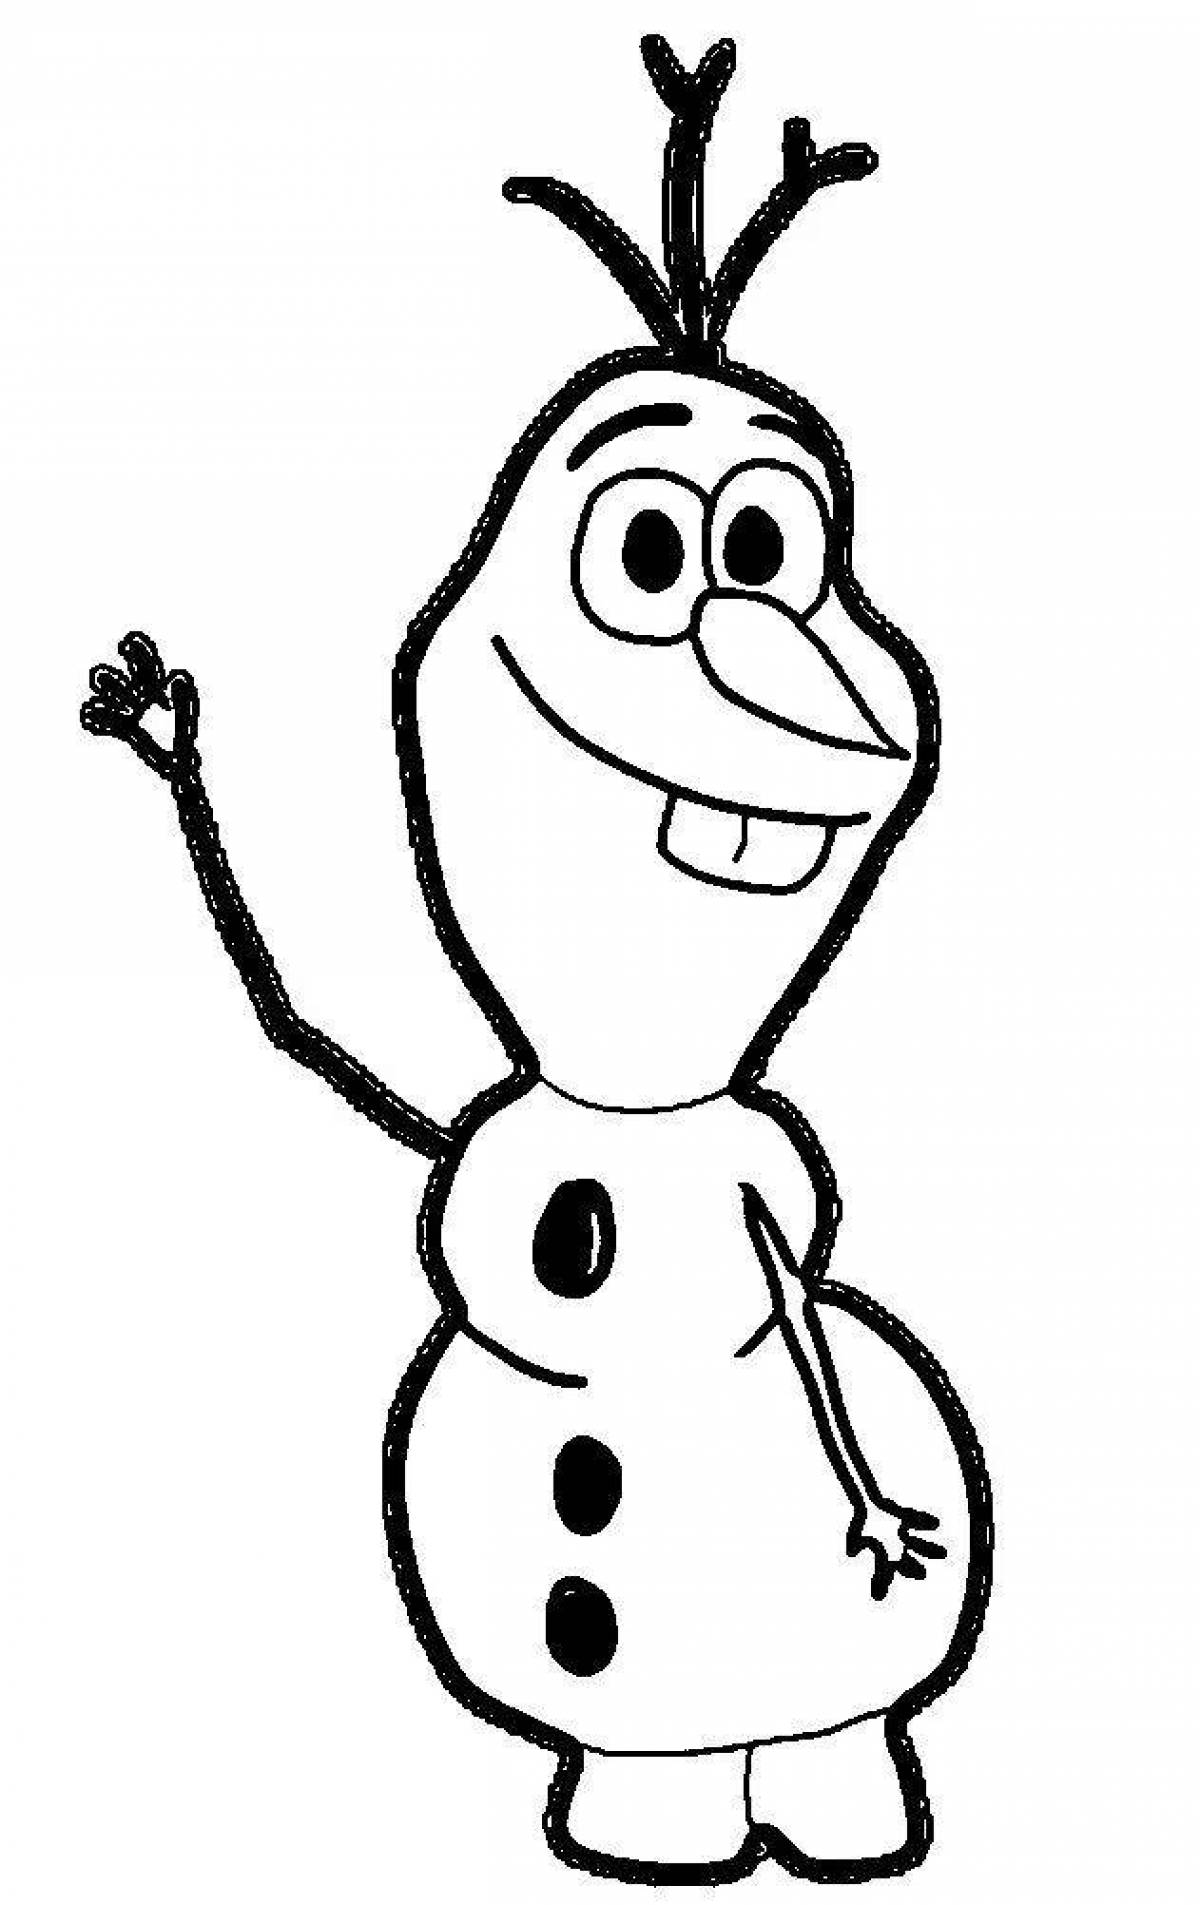 Olaf's quirky snowman coloring book